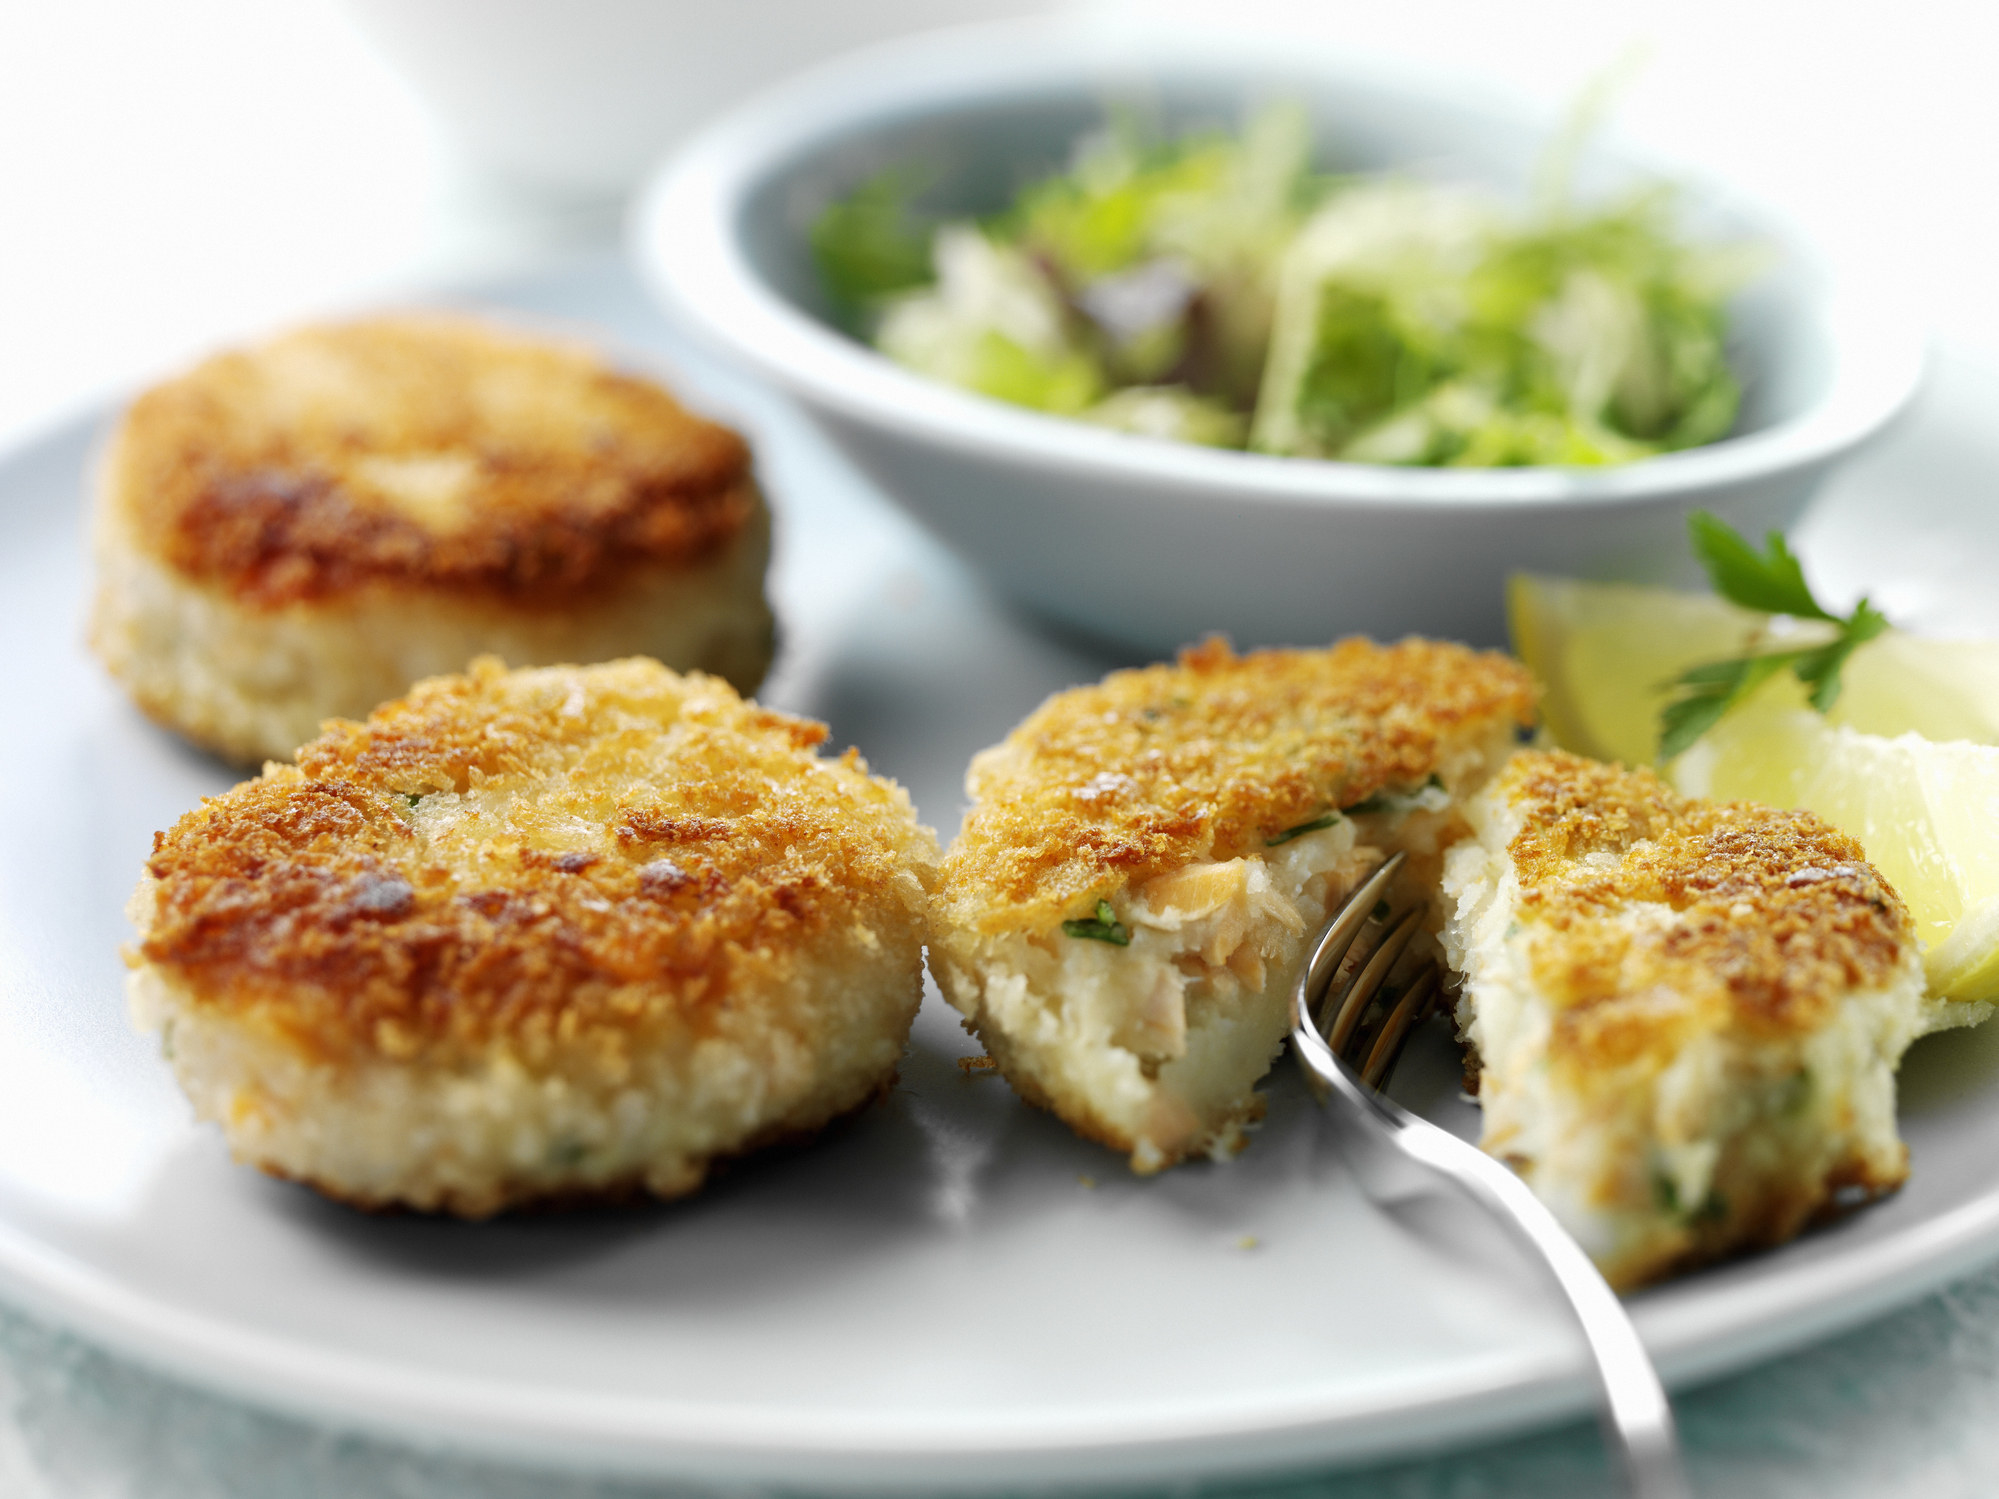 A plate of crab cakes.